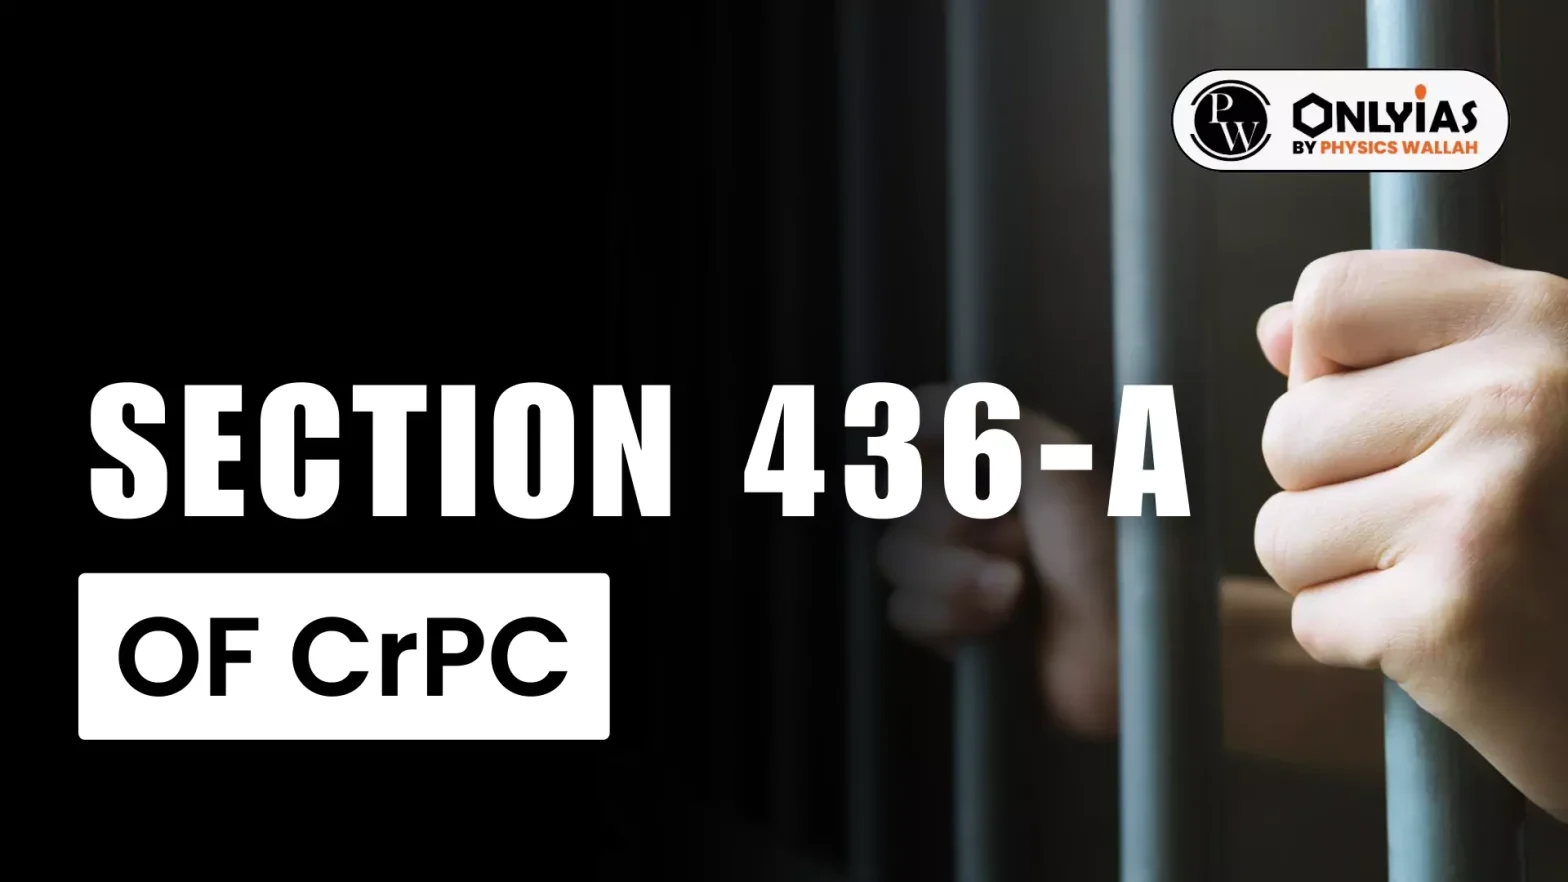 Section 436-A of CrPC